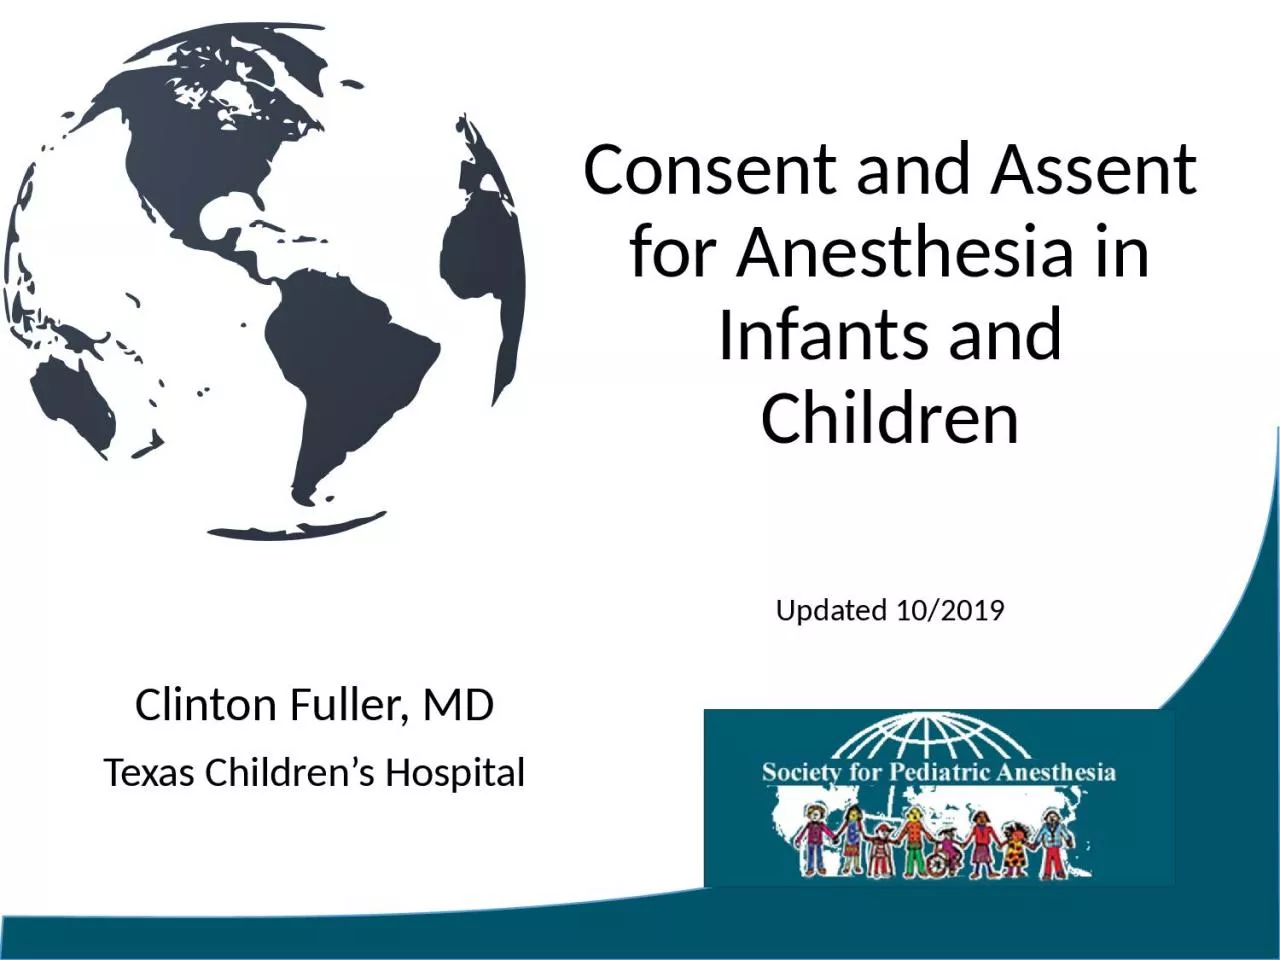 Consent and Assent for Anesthesia in Infants and Children